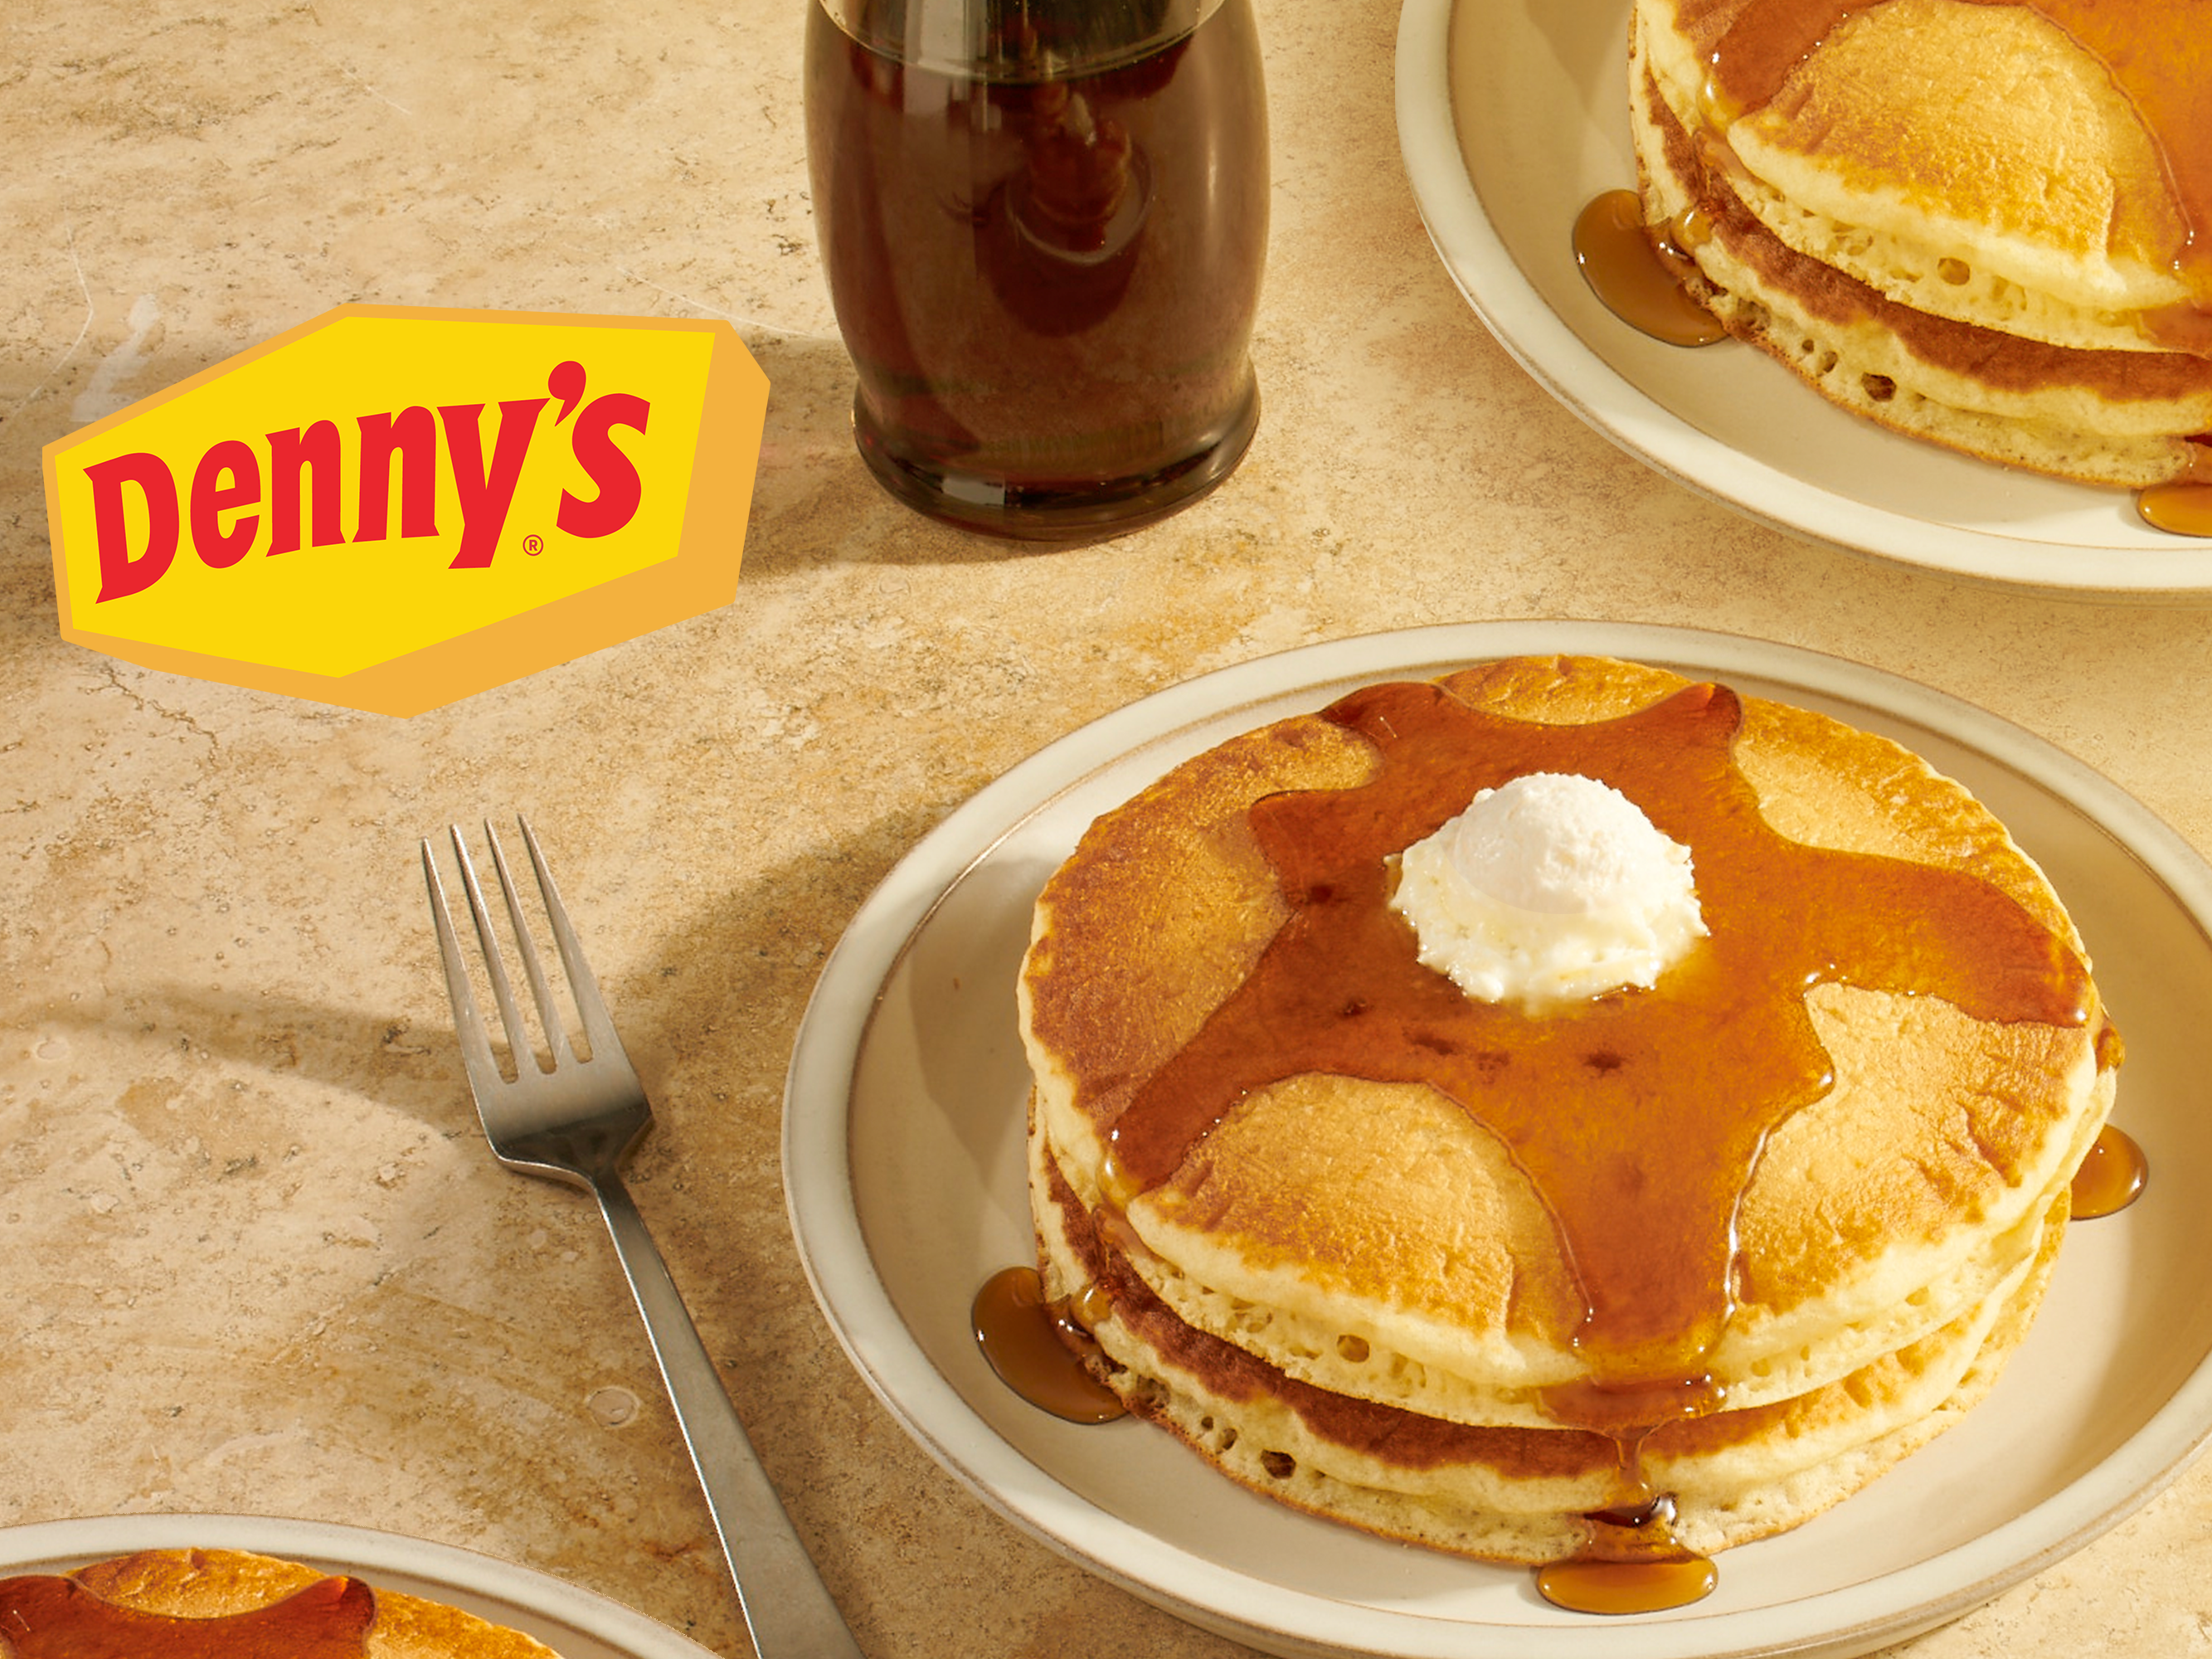 Denny’s Celebrates Love with Free Pancakes and Free Weddings